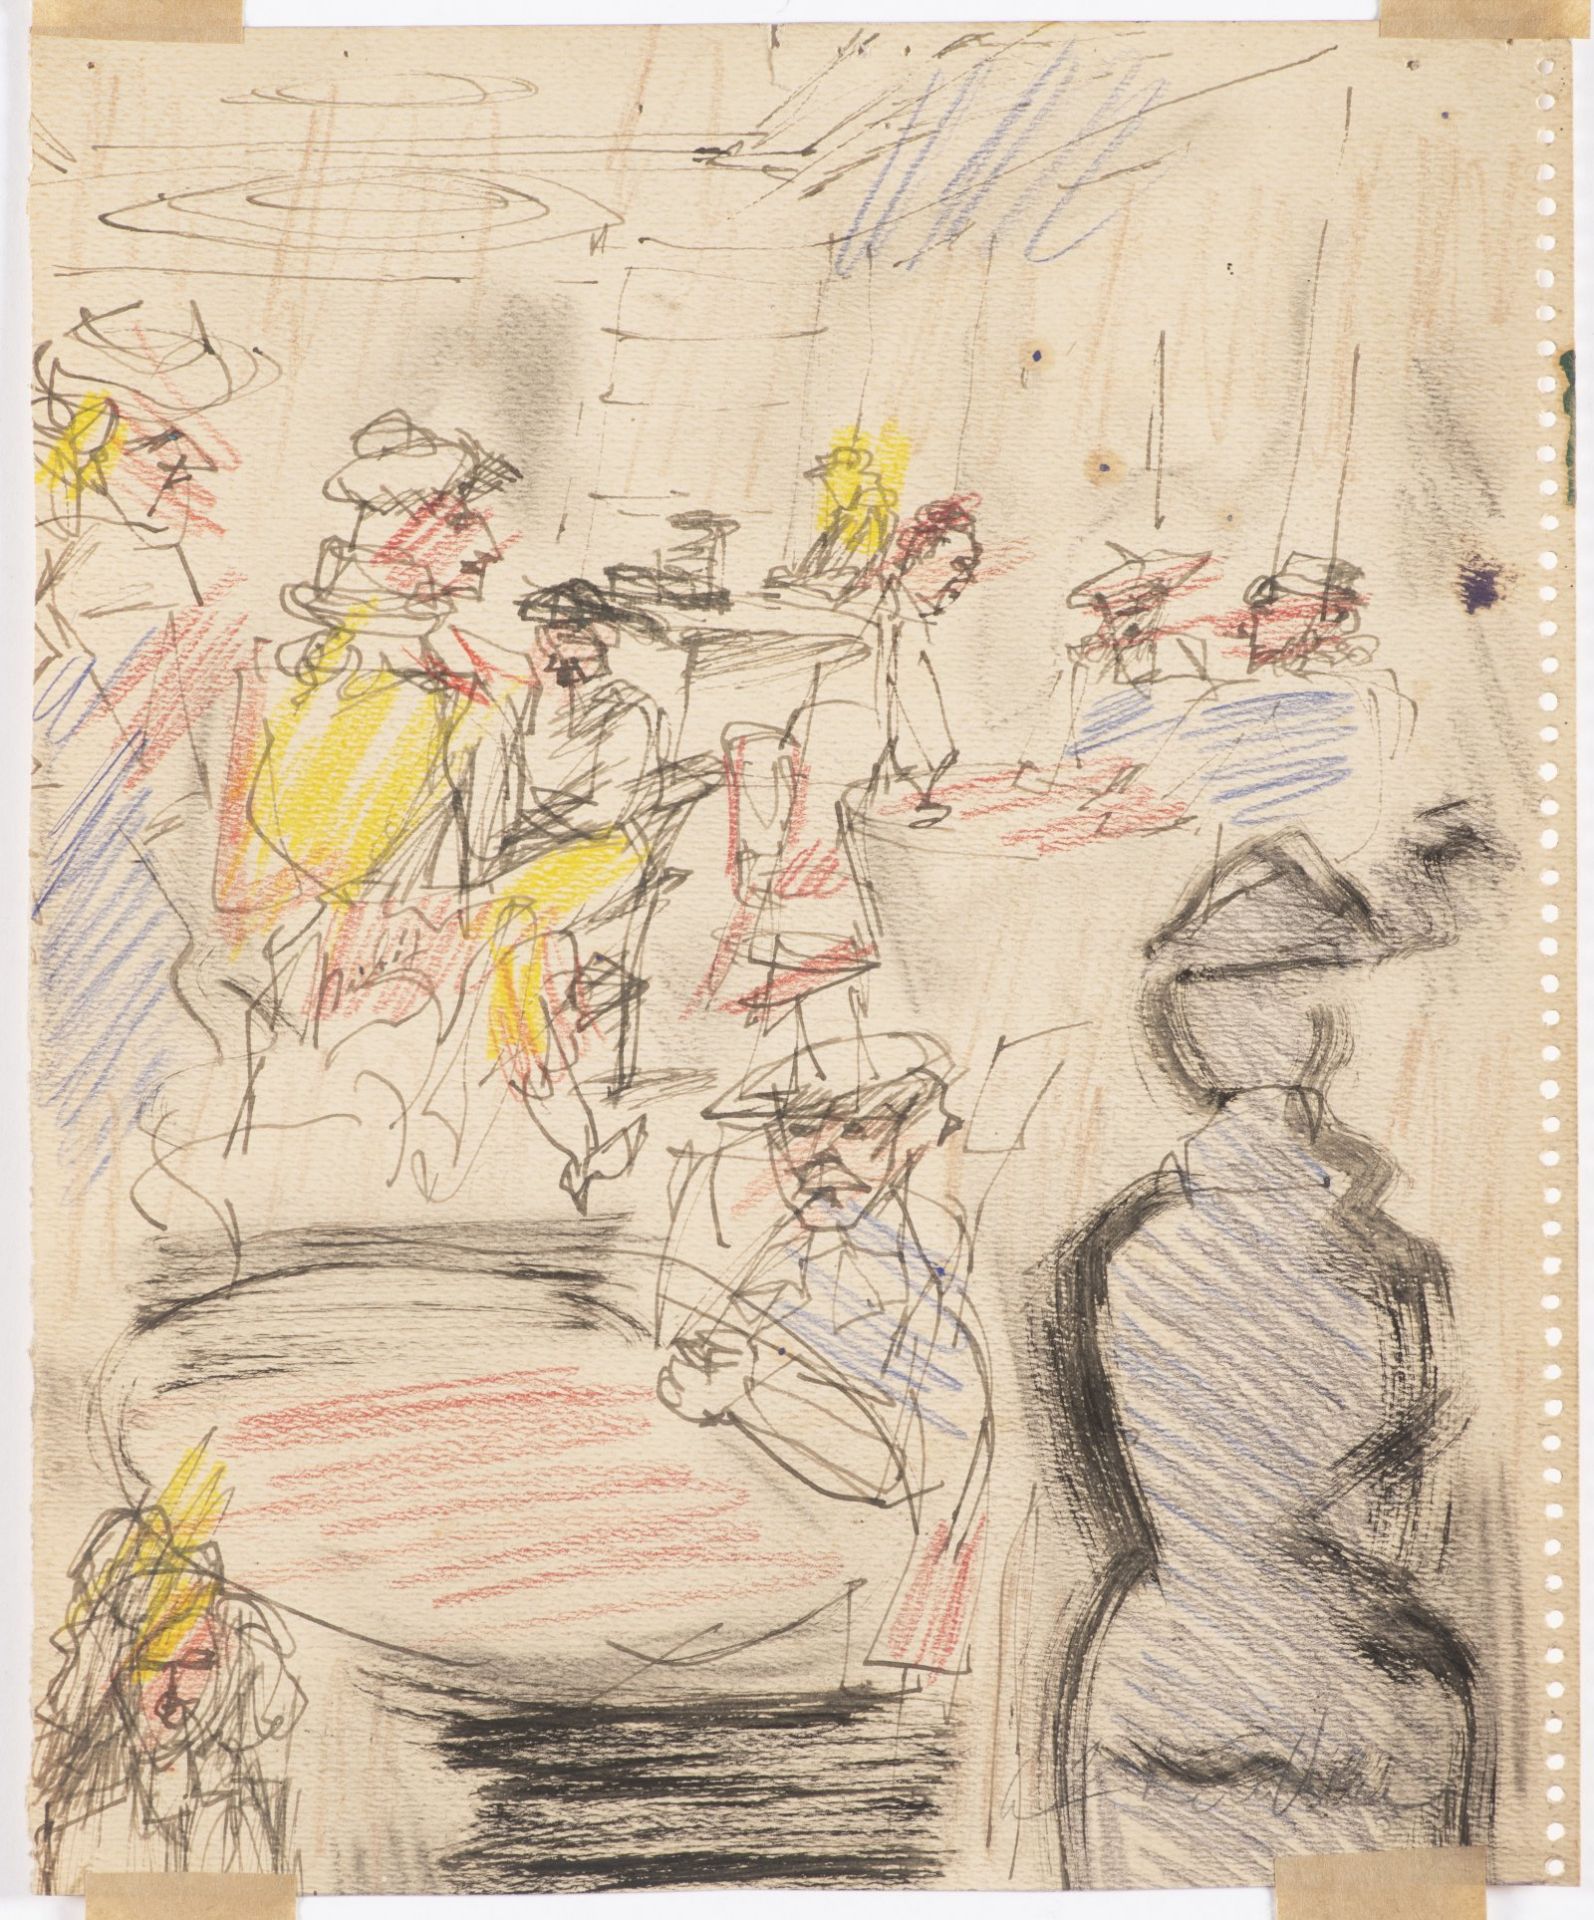 ERNST LUDWIG KIRCHNER 1880 - 1938: IN A BAR Ca. 1920 Ink, coloured pencils, paper 27 x 22 cm Signed: